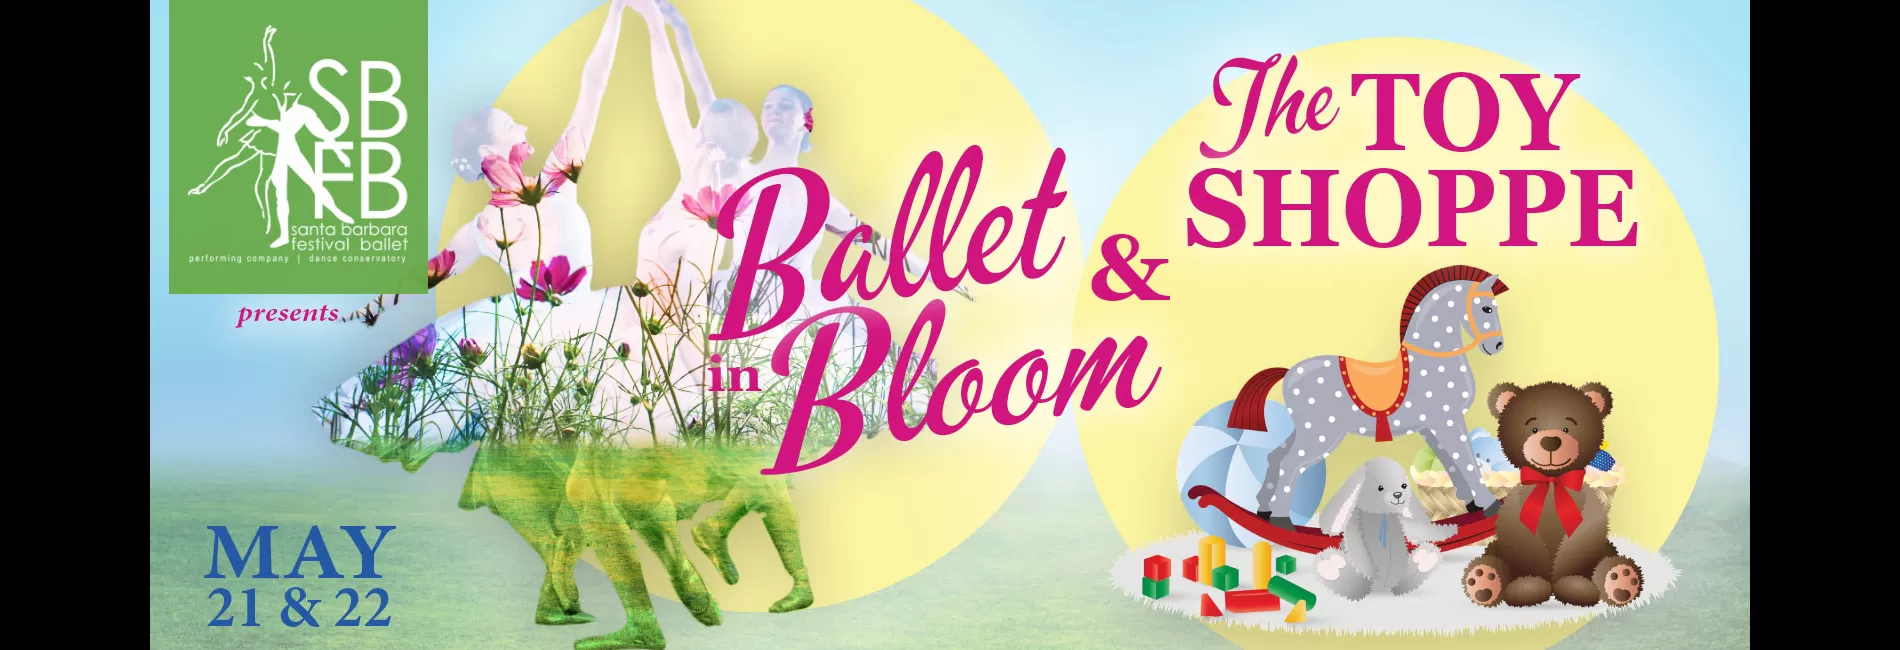 Ballet in Bloom & The Toy Shoppe